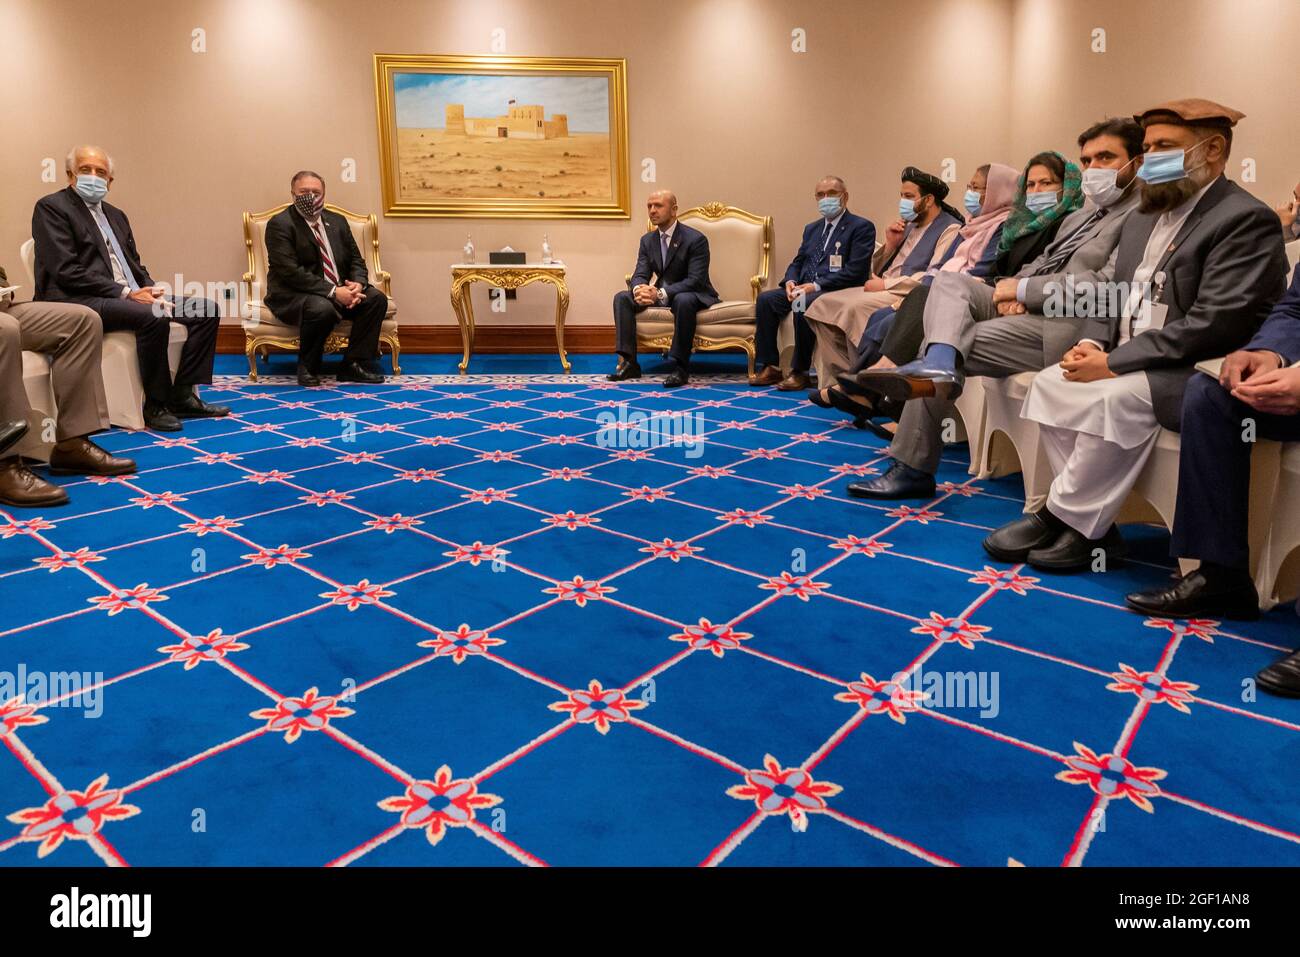 Secretary Pompeo Meets With the Taliban Delegation U.S. Secretary of State Michael R. Pompeo meets with the Taliban Delegation in Doha, Qatar, on September 12, 2020. Stock Photo